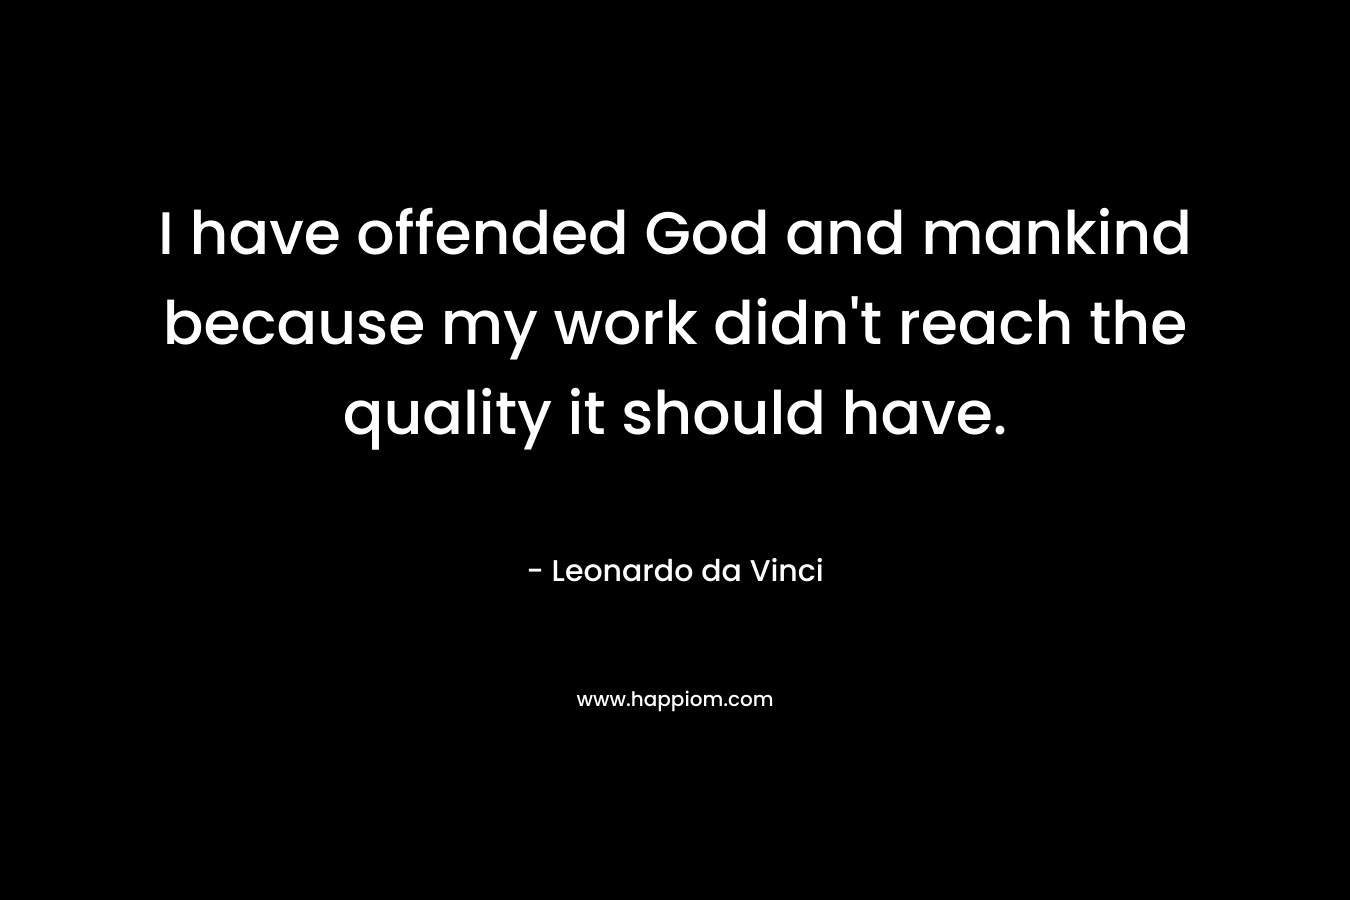 I have offended God and mankind because my work didn’t reach the quality it should have. – Leonardo da Vinci